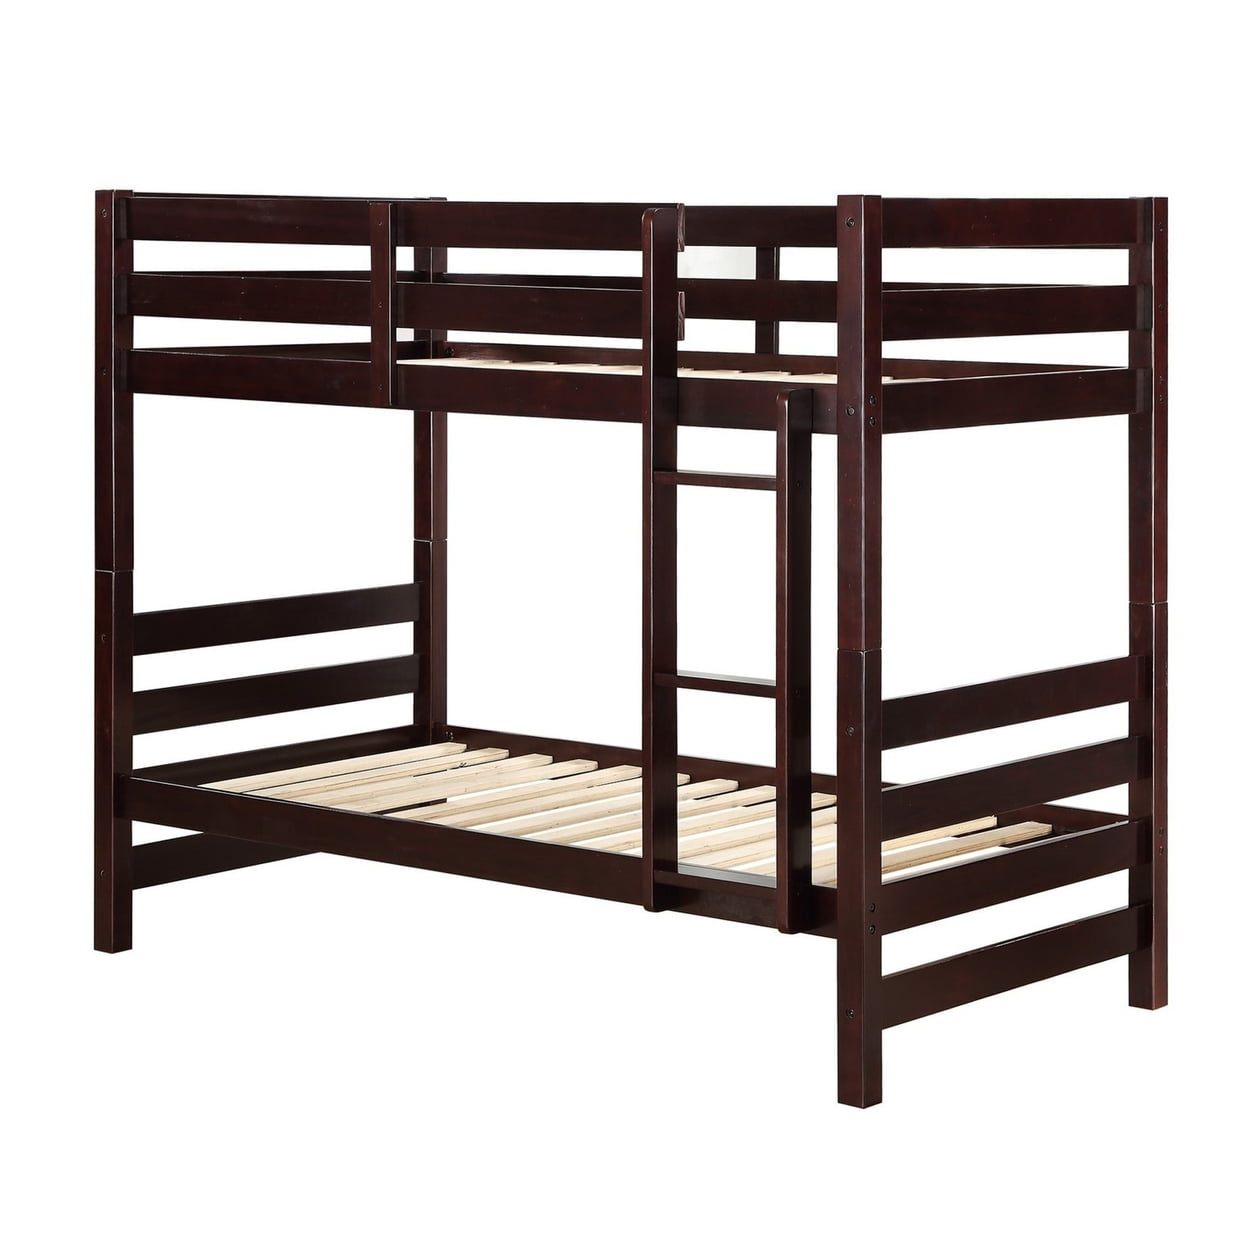 Bm230712 Slatted Twin Over Twin Bunk Bed With Attached Ladder, Espresso Brown